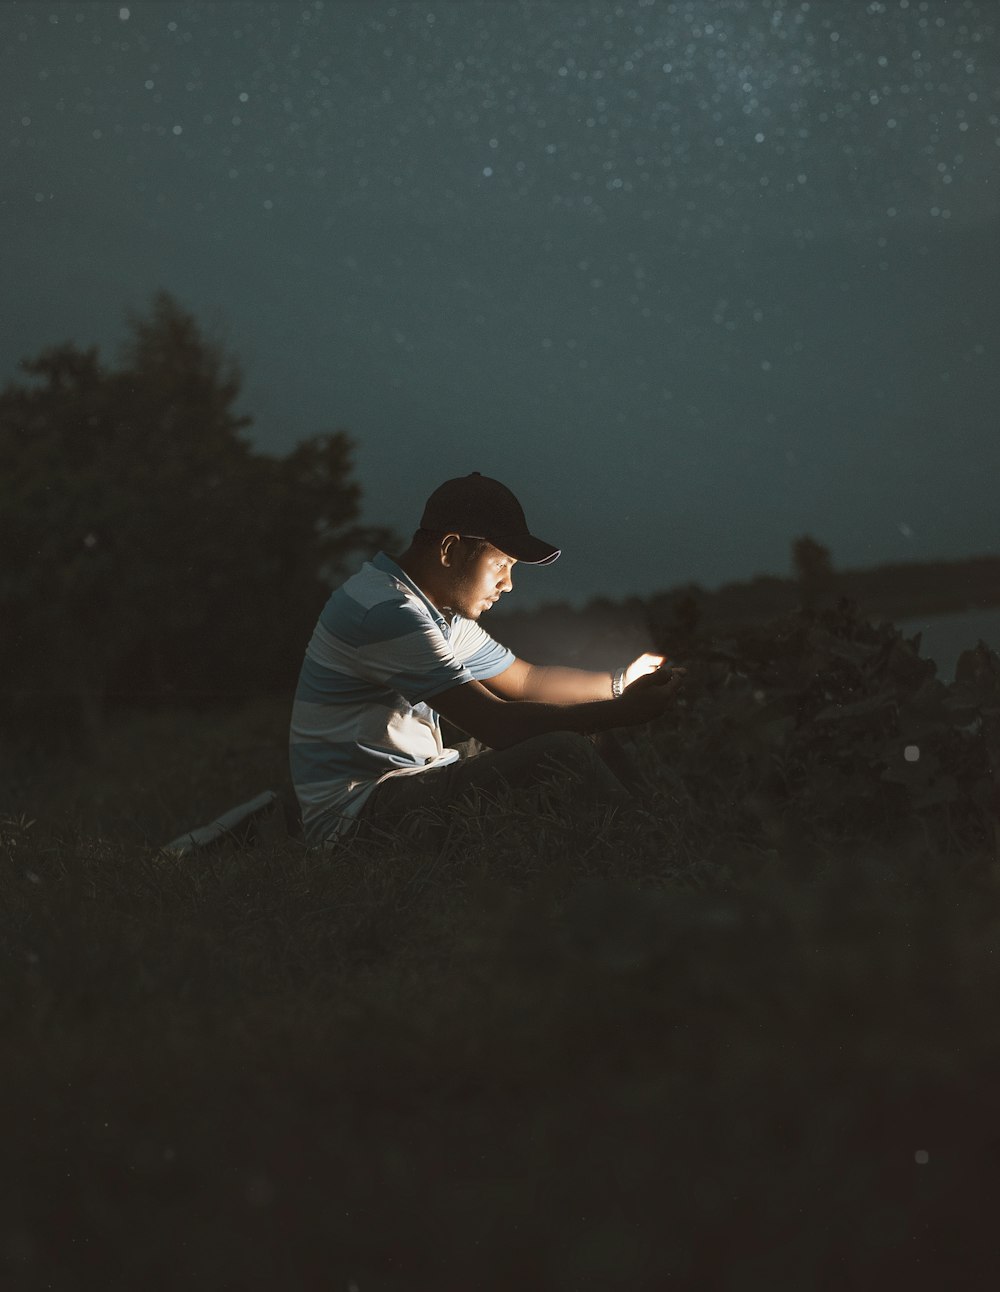 a man in a hat and shirt sitting on a hill at night